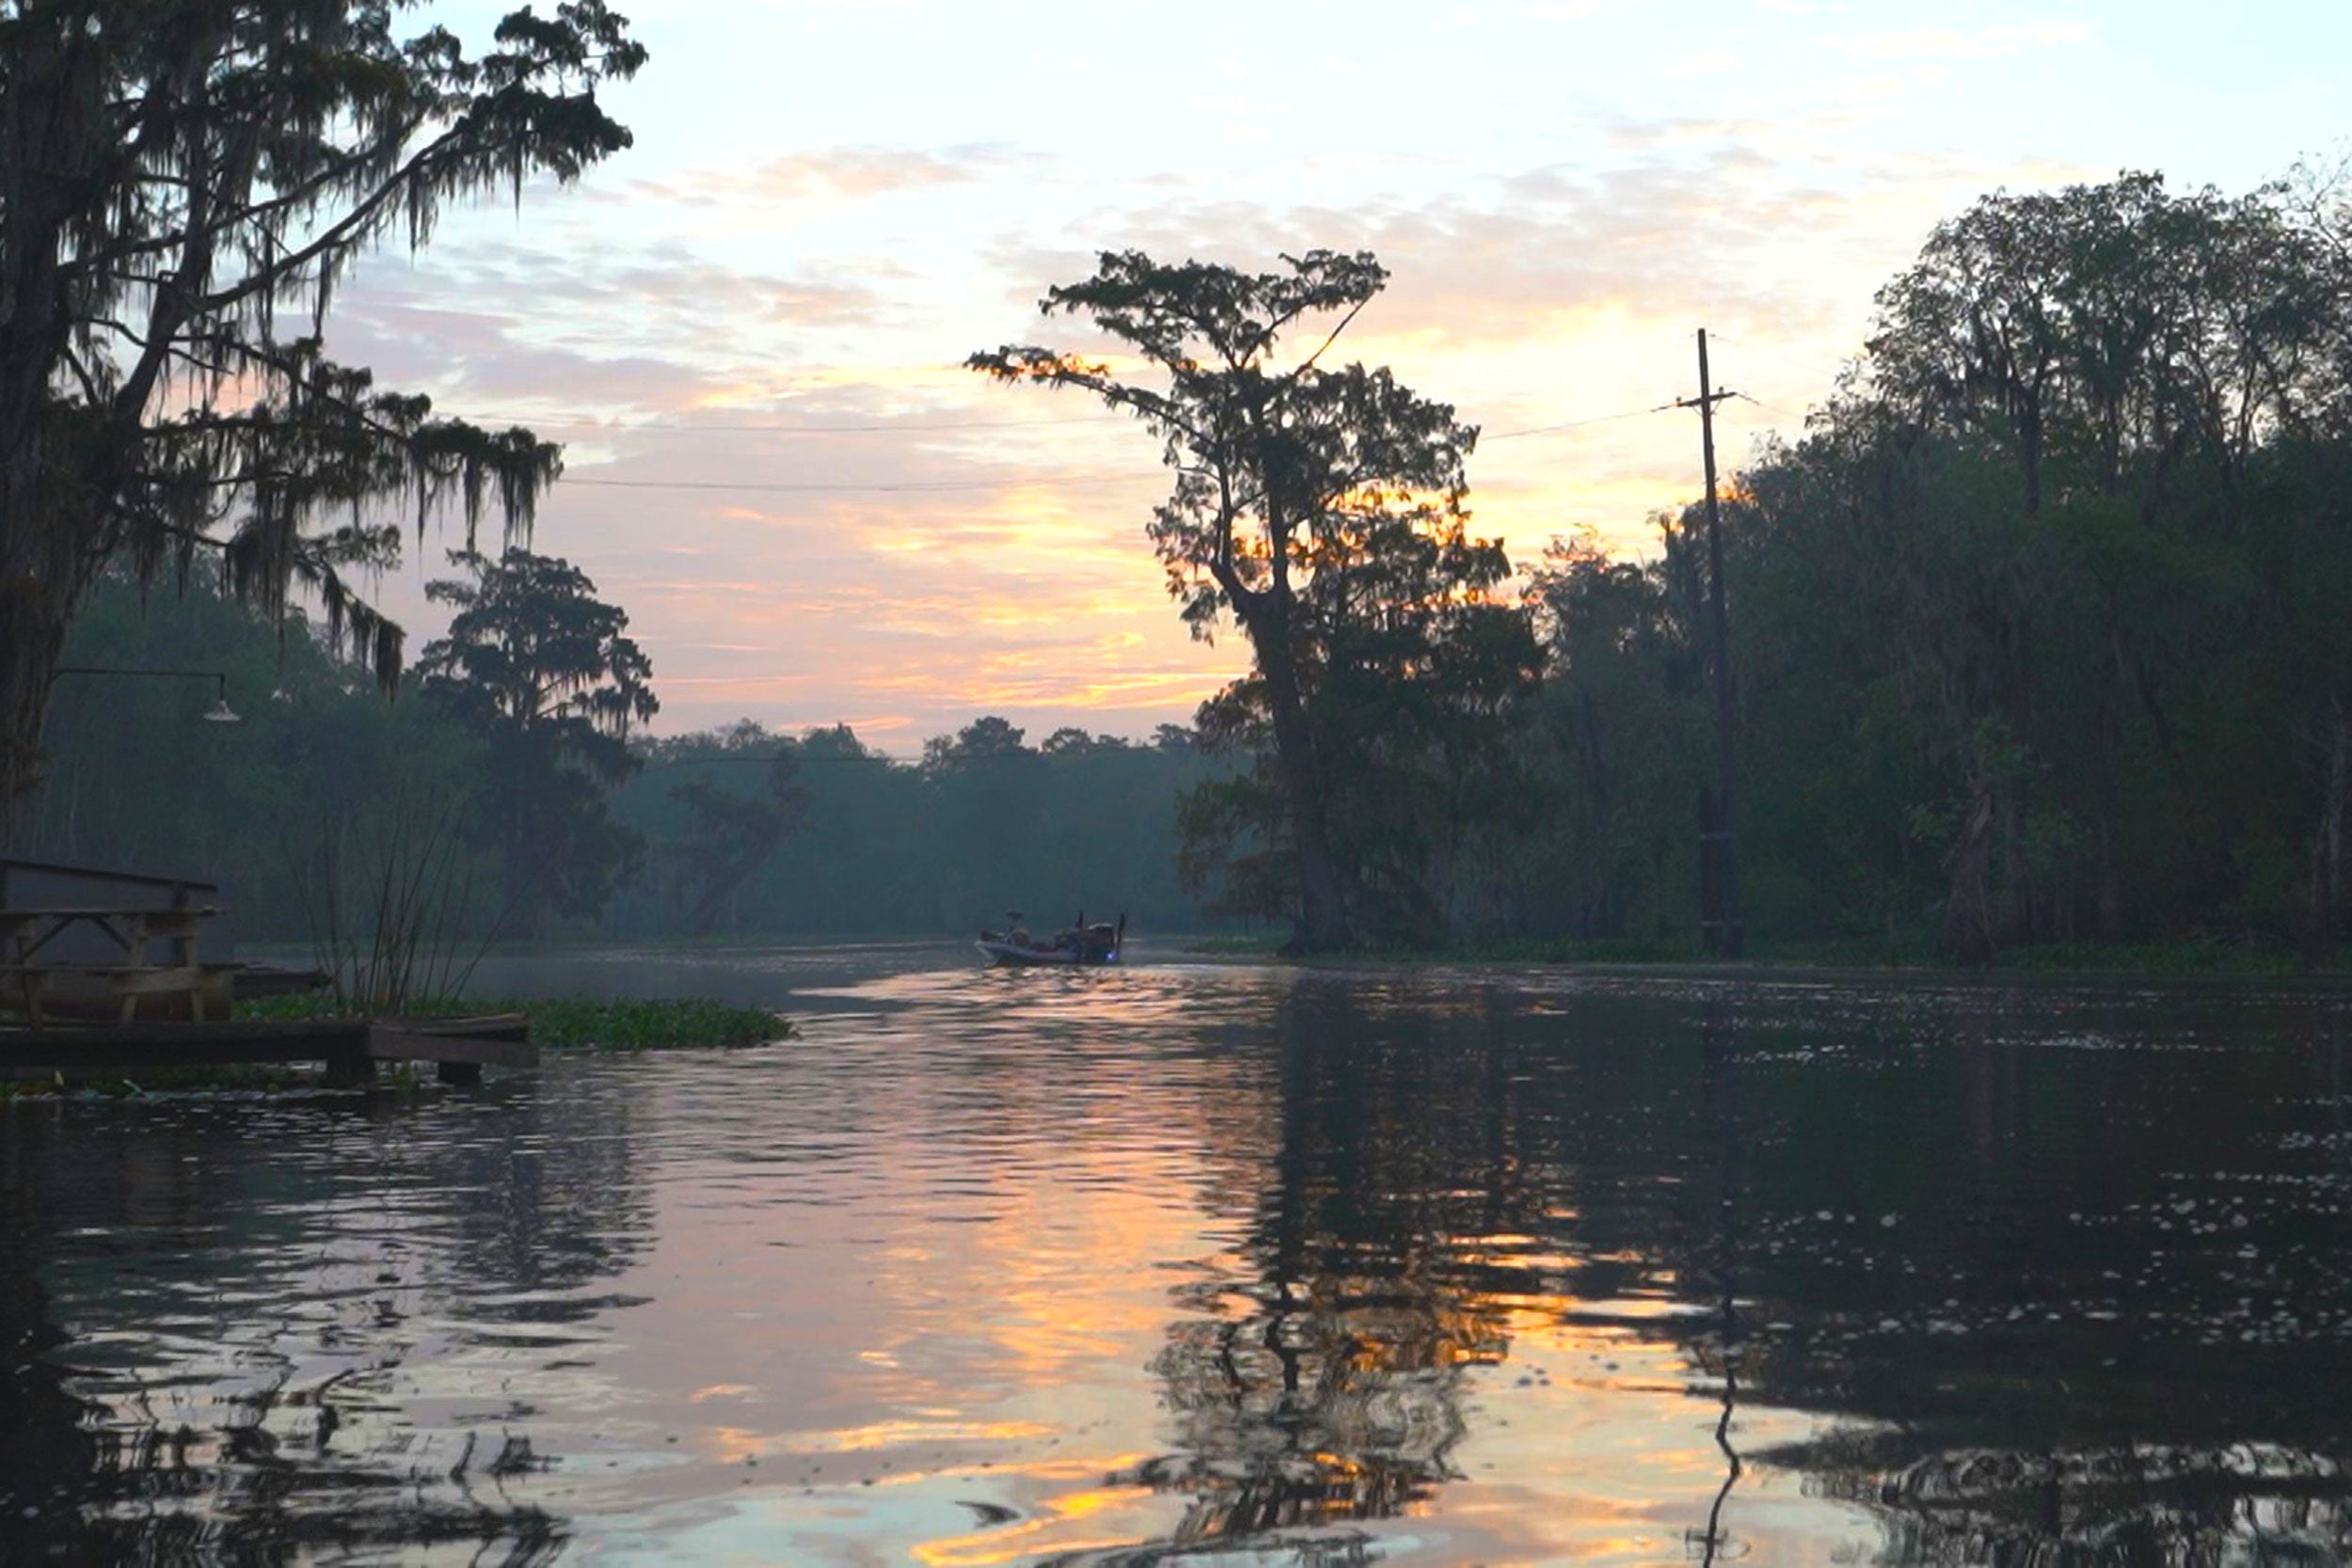 Late dawn on Blind River, London Vallery's ancestral fishing lands, in Central Louisiana.